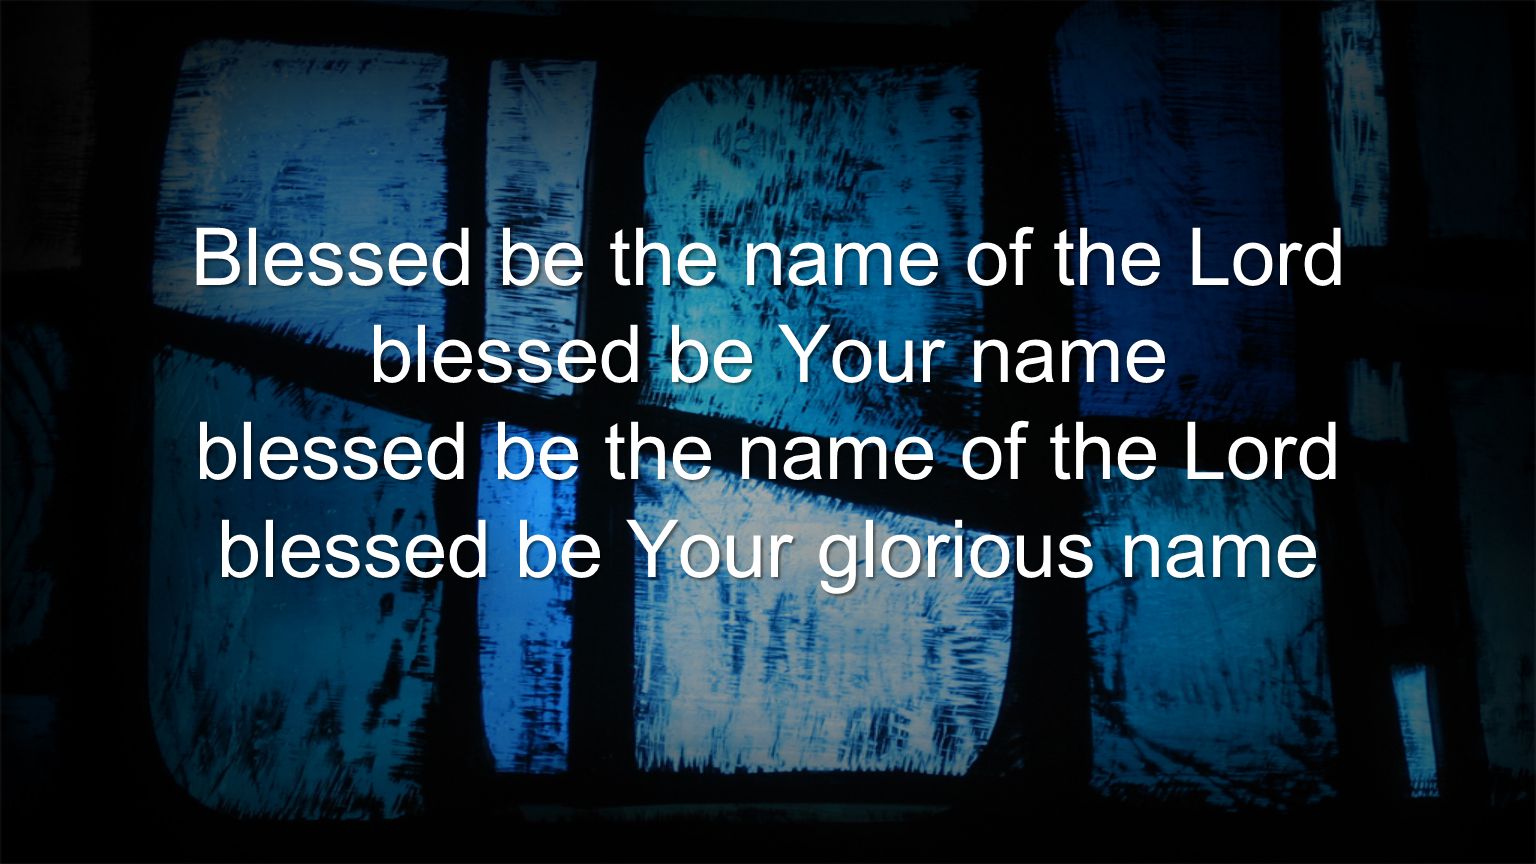 Blessed be the name of the Lord blessed be Your name